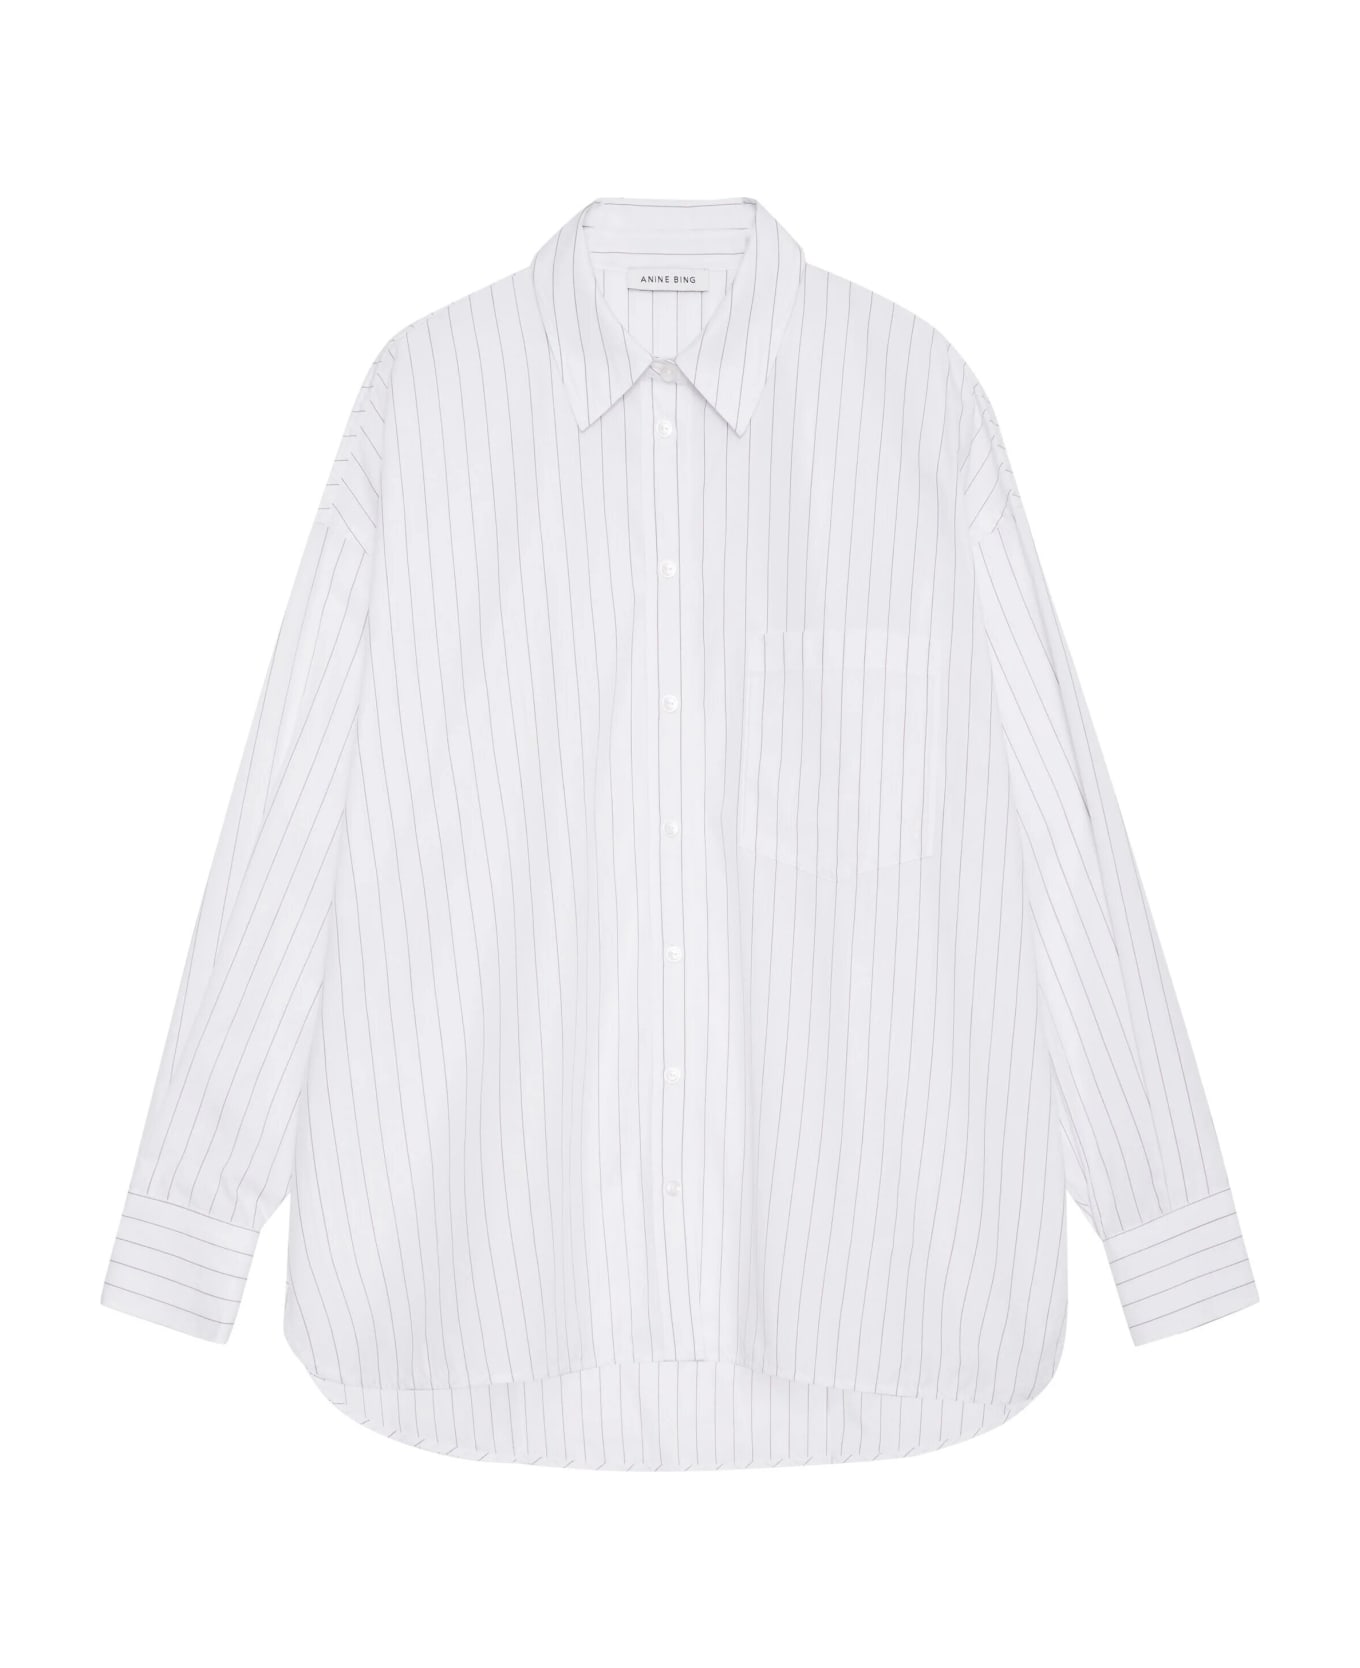 Anine Bing Chrissy Shirt Stripe - White And Taupe シャツ